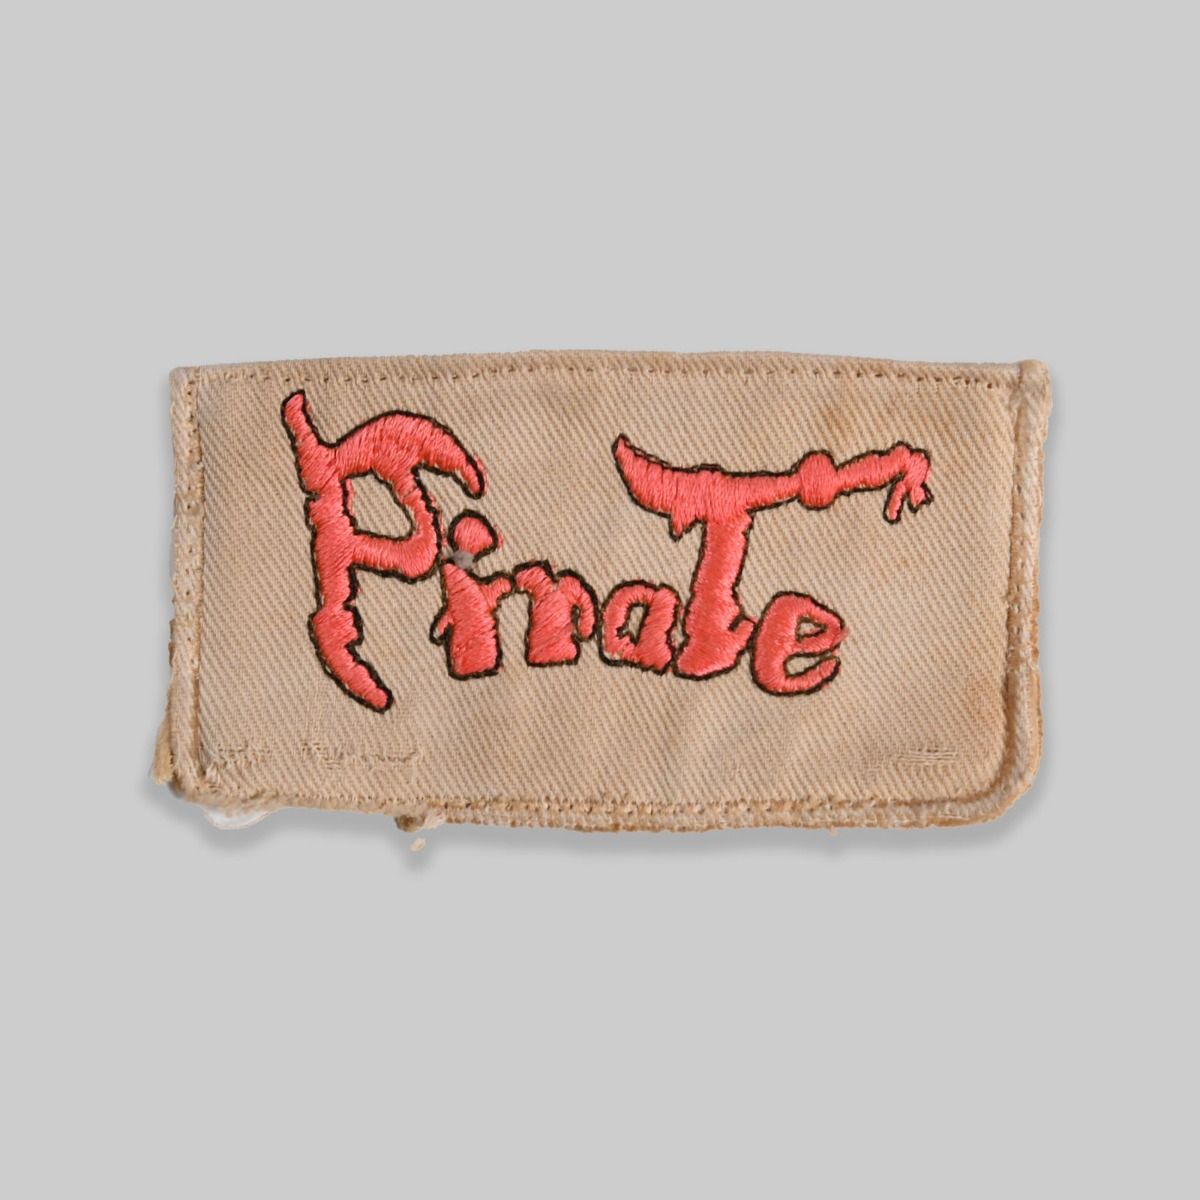 Hand-Woven Pirate Patch